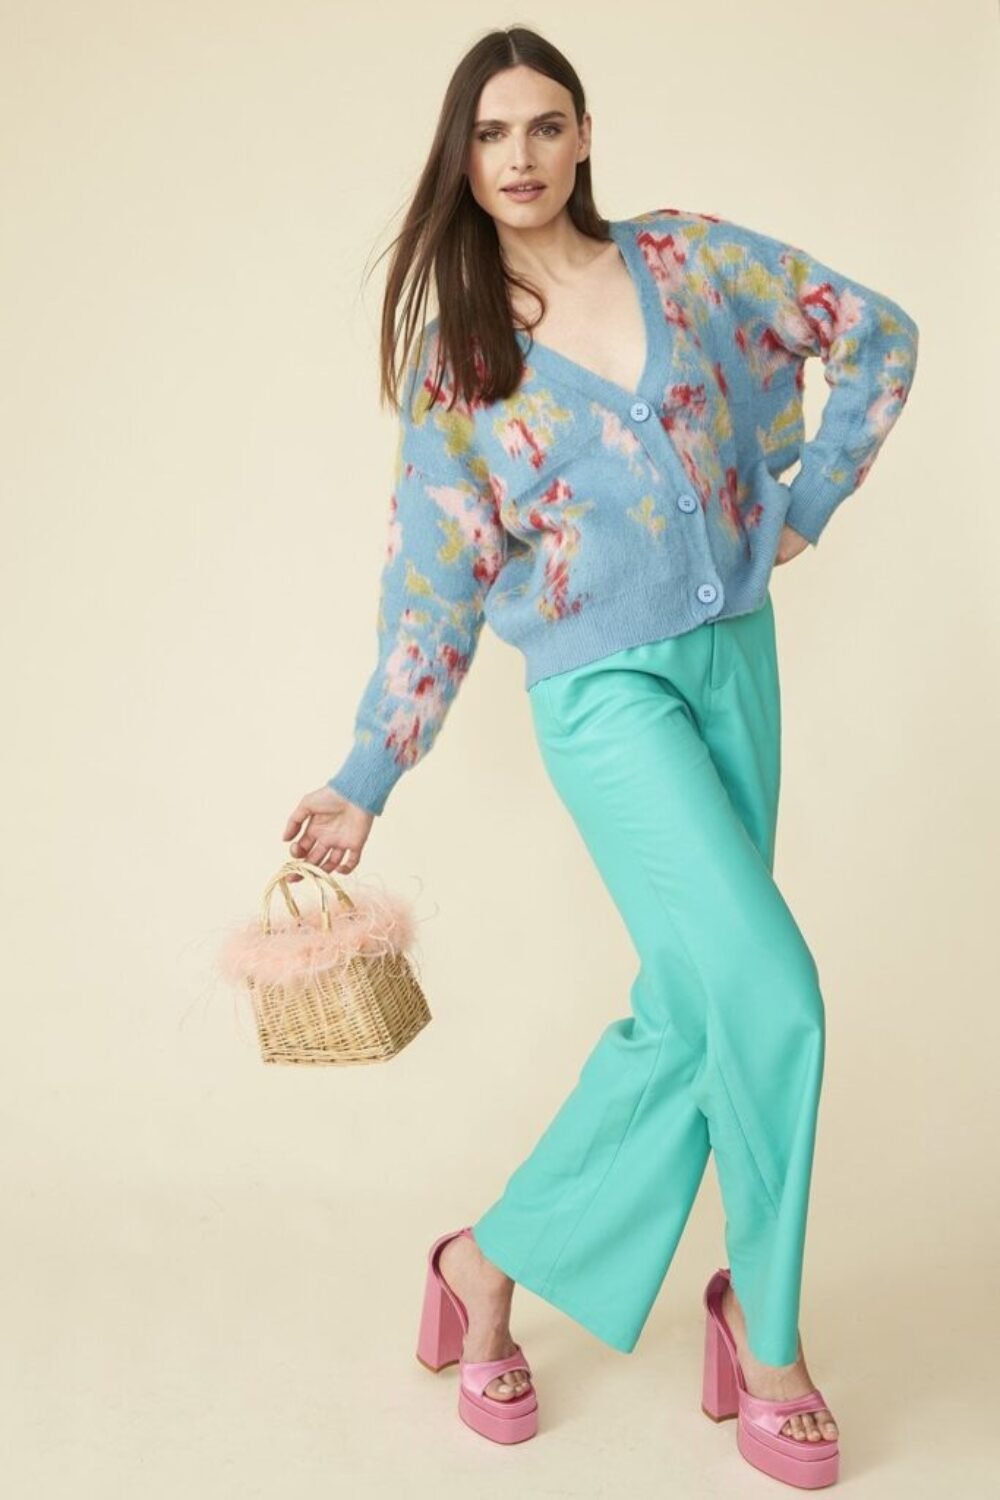 Shop Lux Aqua Blue Eco Leather Trousers and women's luxury and designer clothes at www.lux-apparel.co.uk